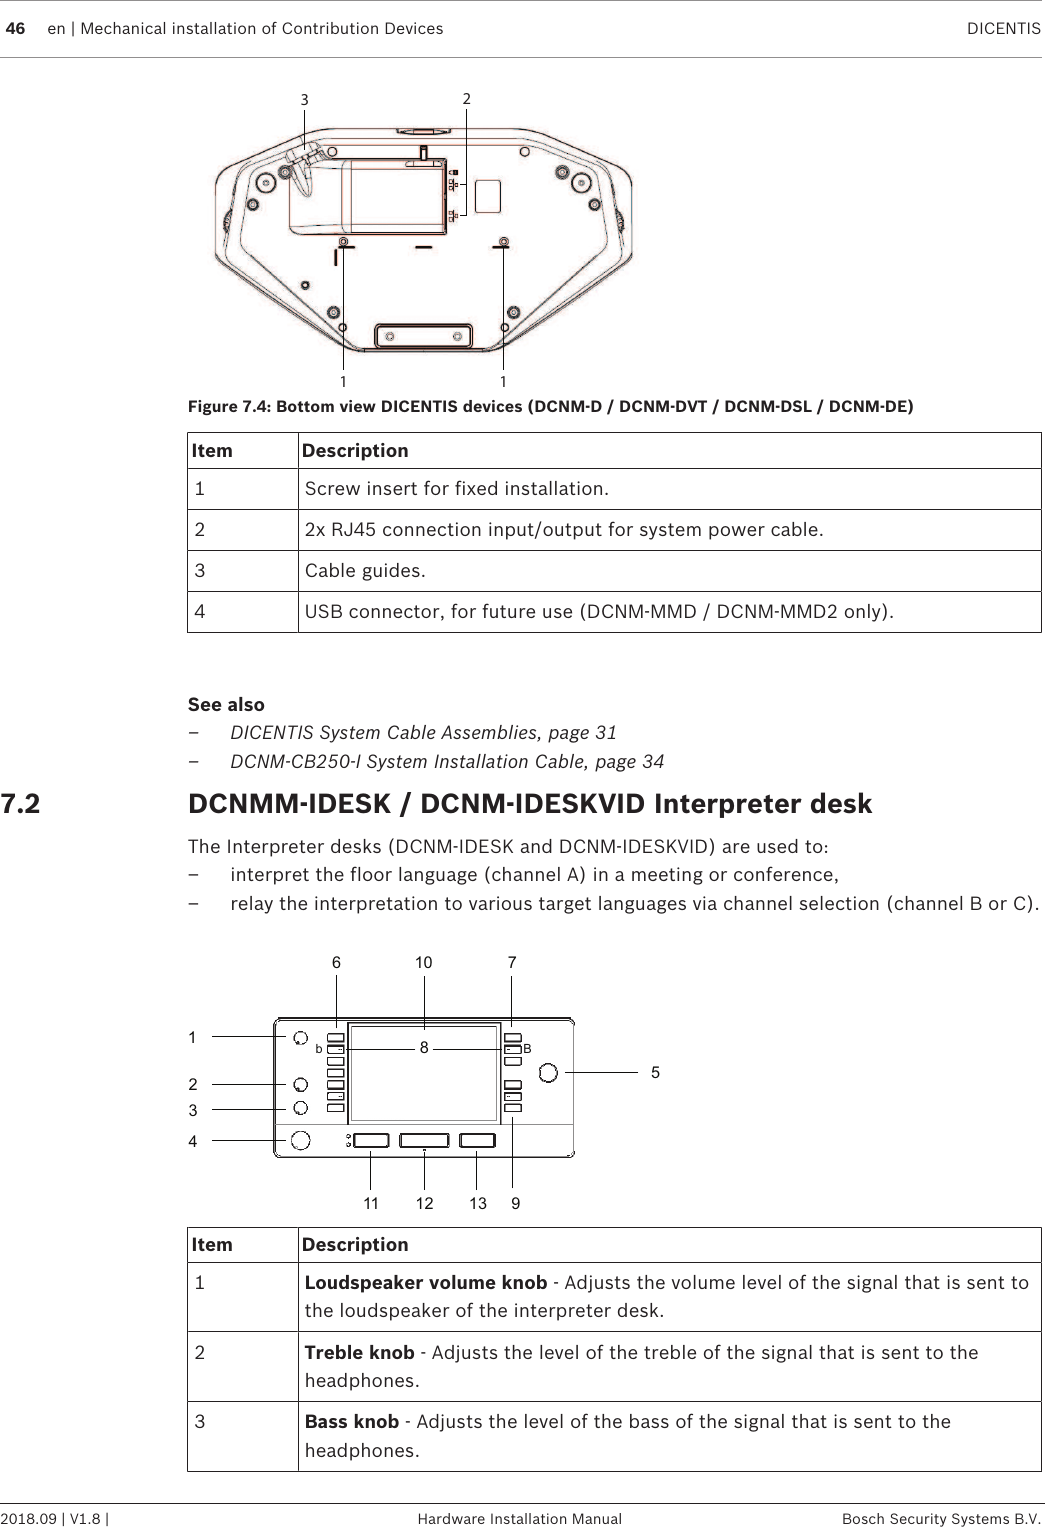 46 en | Mechanical installation of Contribution Devices DICENTIS2018.09 | V1.8 | Hardware Installation Manual Bosch Security Systems B.V.1 132Figure7.4: Bottom view DICENTIS devices (DCNM-D / DCNM-DVT / DCNM-DSL / DCNM-DE)Item Description1 Screw insert for fixed installation.2 2x RJ45 connection input/output for system power cable.3 Cable guides.4 USB connector, for future use (DCNM-MMD / DCNM-MMD2 only).See also– DICENTIS System Cable Assemblies, page 31– DCNM-CB250-I System Installation Cable, page 347.2 DCNMM-IDESK / DCNM-IDESKVID Interpreter deskThe Interpreter desks (DCNM-IDESK and DCNM-IDESKVID) are used to:– interpret the floor language (channel A) in a meeting or conference,– relay the interpretation to various target languages via channel selection (channel B or C).123456 710118912 13b BItem Description1Loudspeaker volume knob - Adjusts the volume level of the signal that is sent tothe loudspeaker of the interpreter desk.2Treble knob - Adjusts the level of the treble of the signal that is sent to theheadphones.3Bass knob - Adjusts the level of the bass of the signal that is sent to theheadphones.